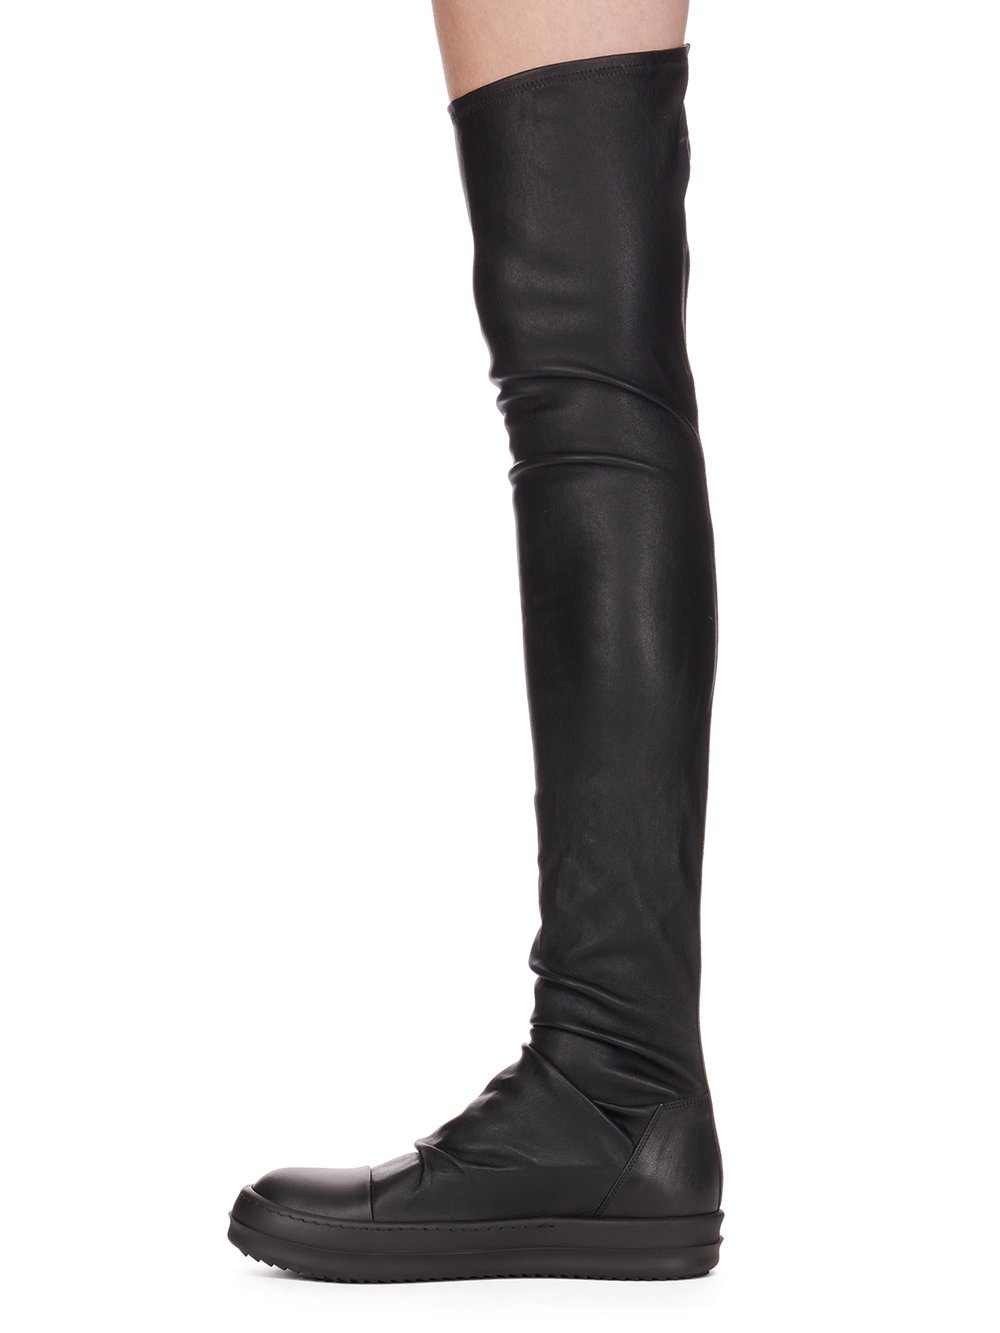 BOOTS - 3